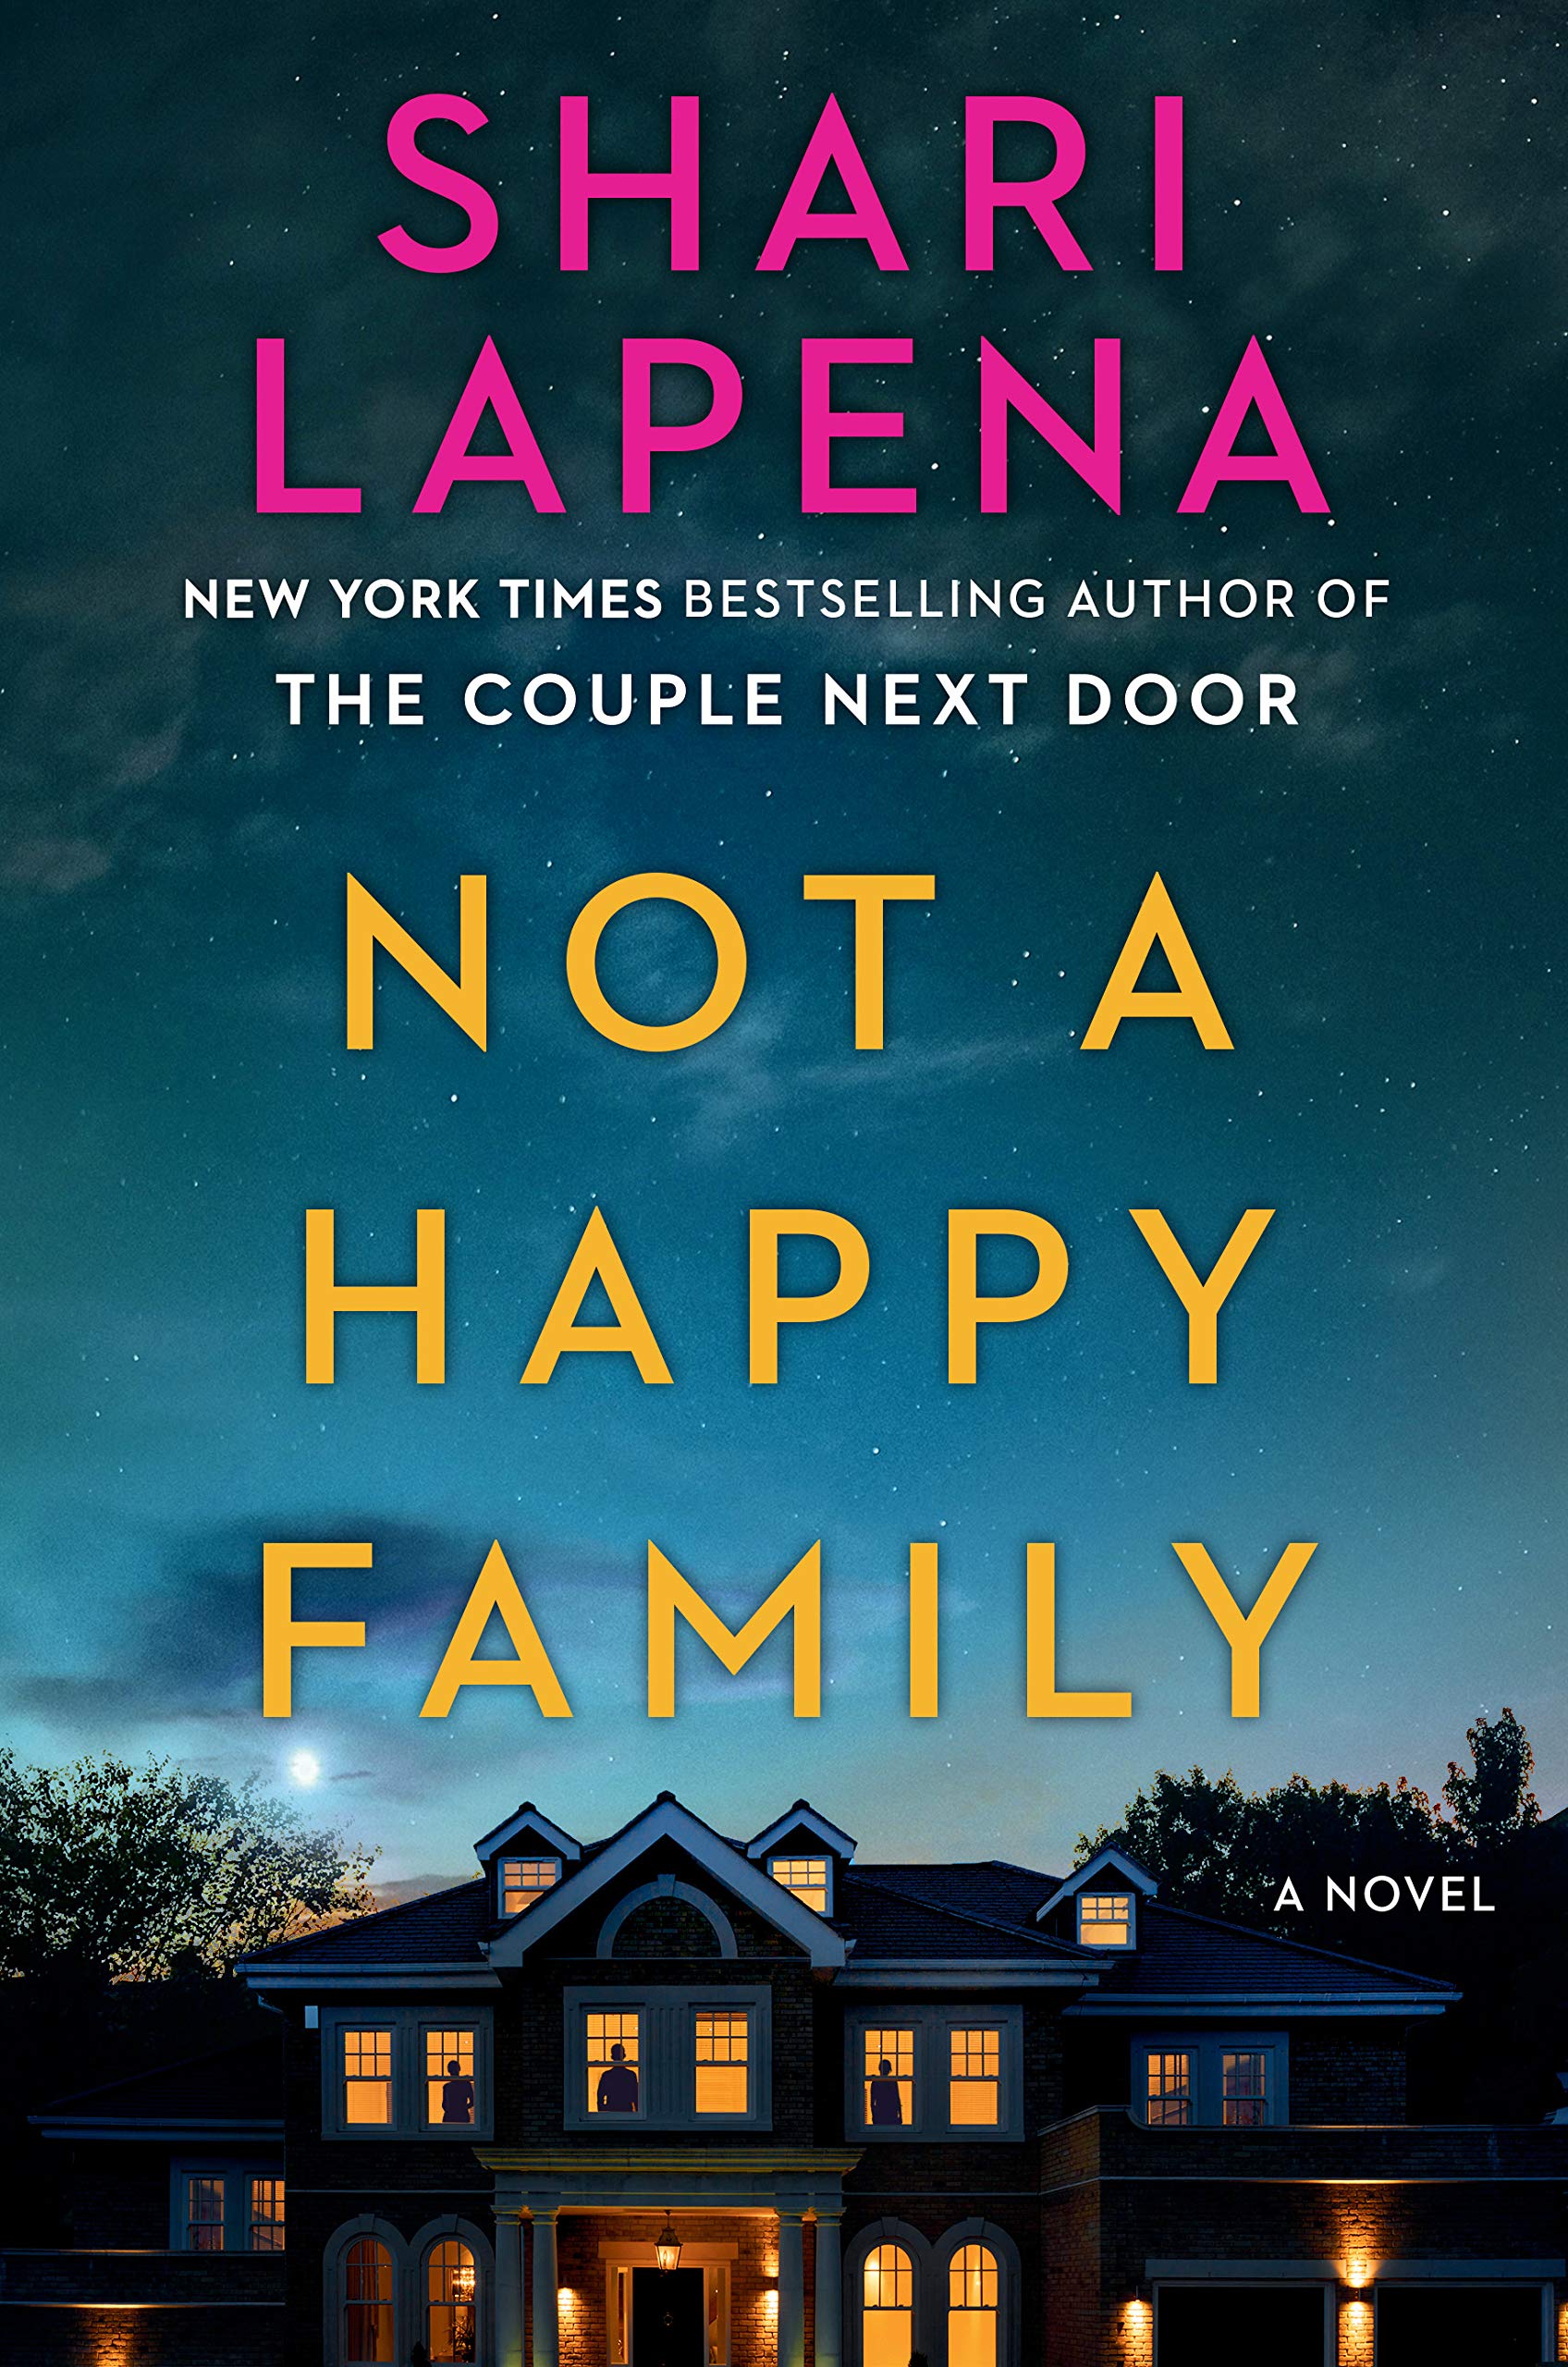 Not a Happy Family: A Novel Paperback by Shari Lapena